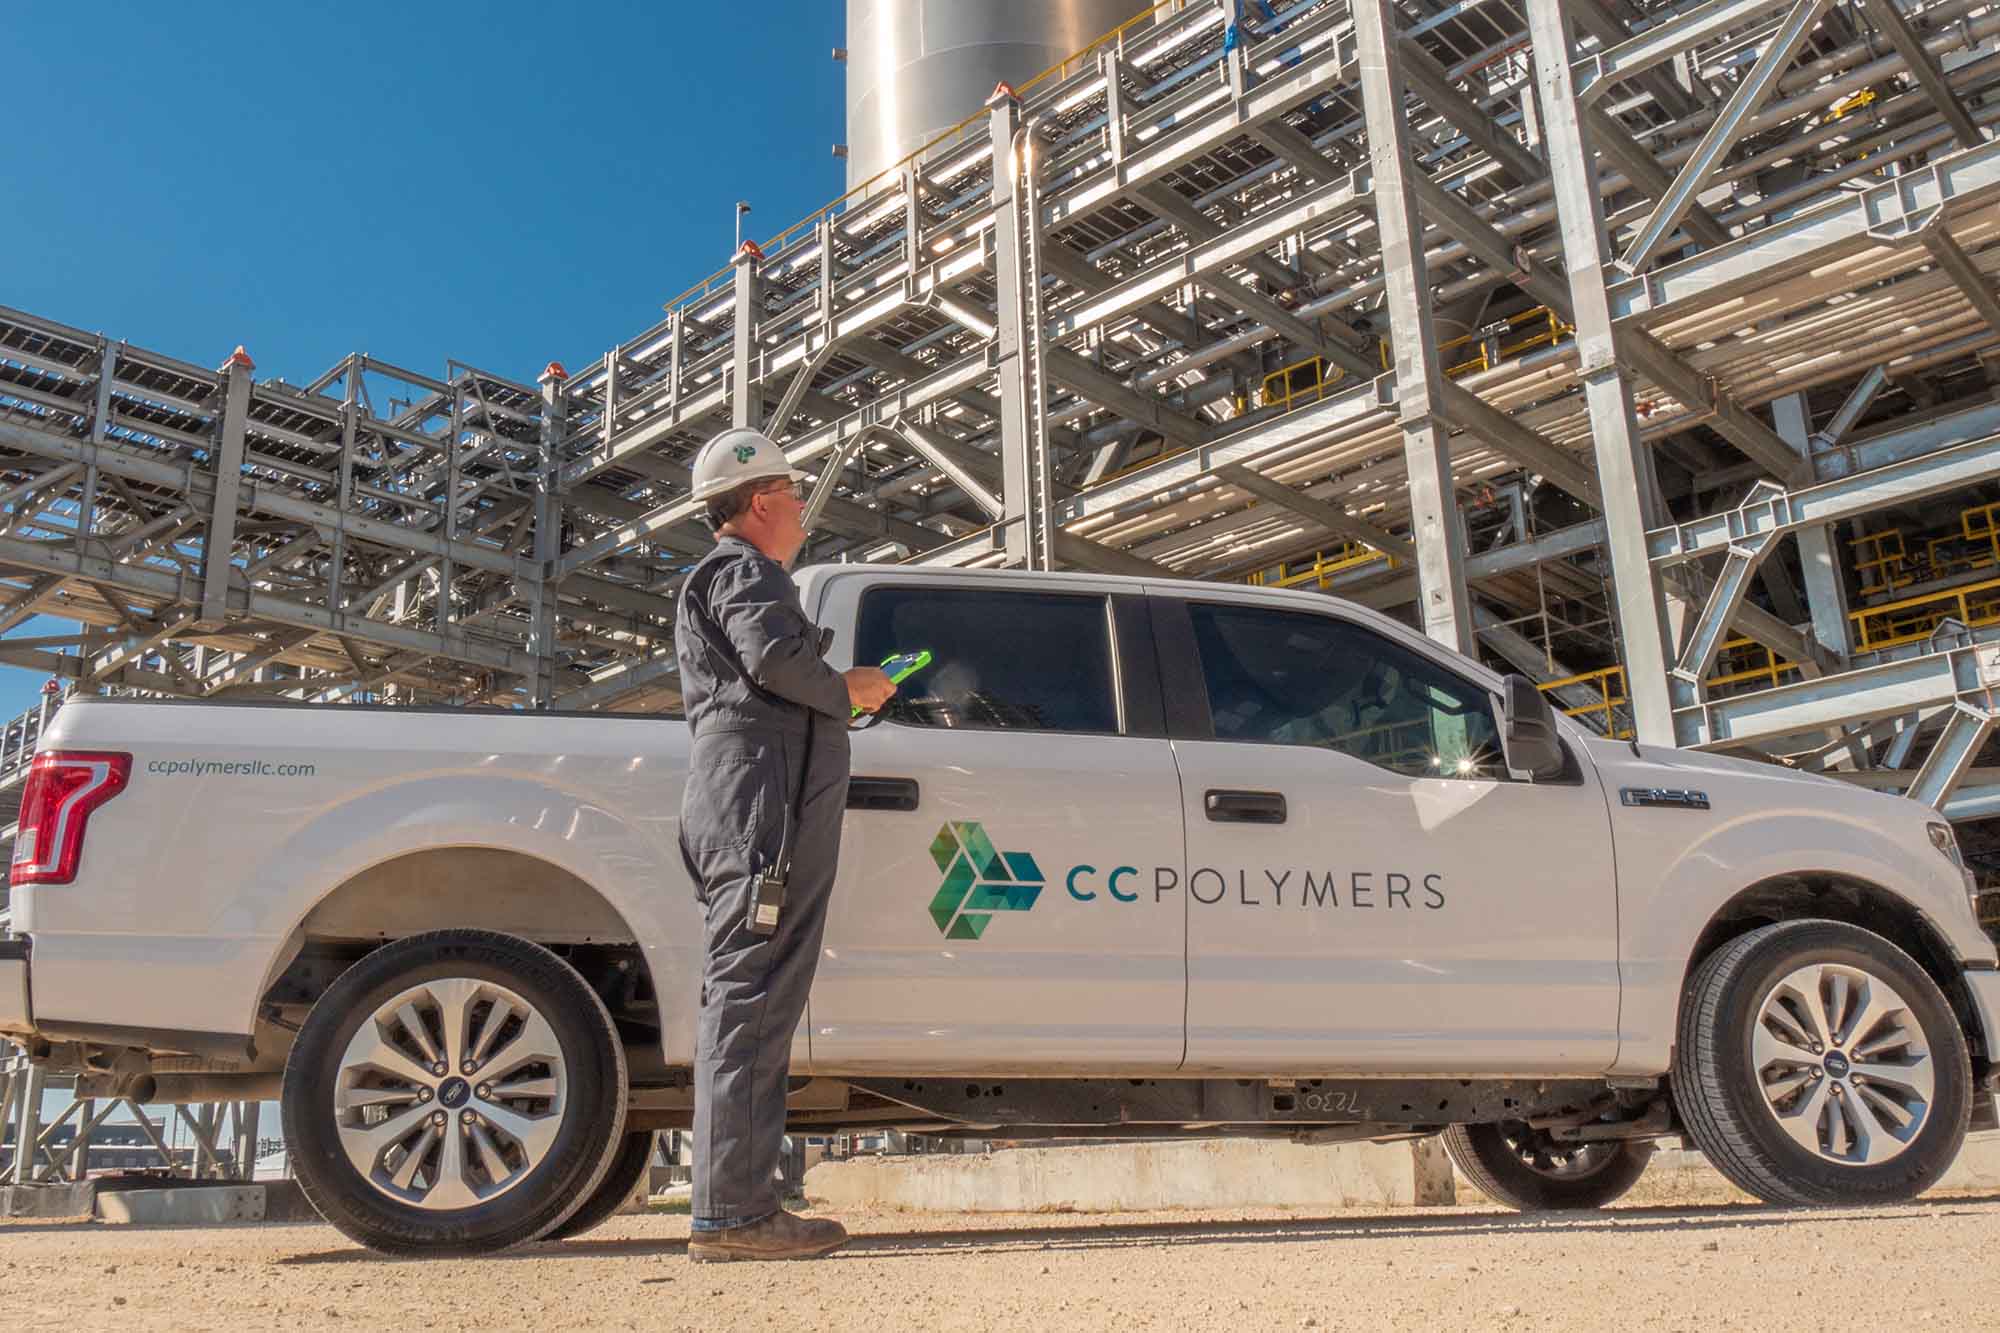 Showing a pickup truck with the CC Polymers logo and worker wearing overalls.